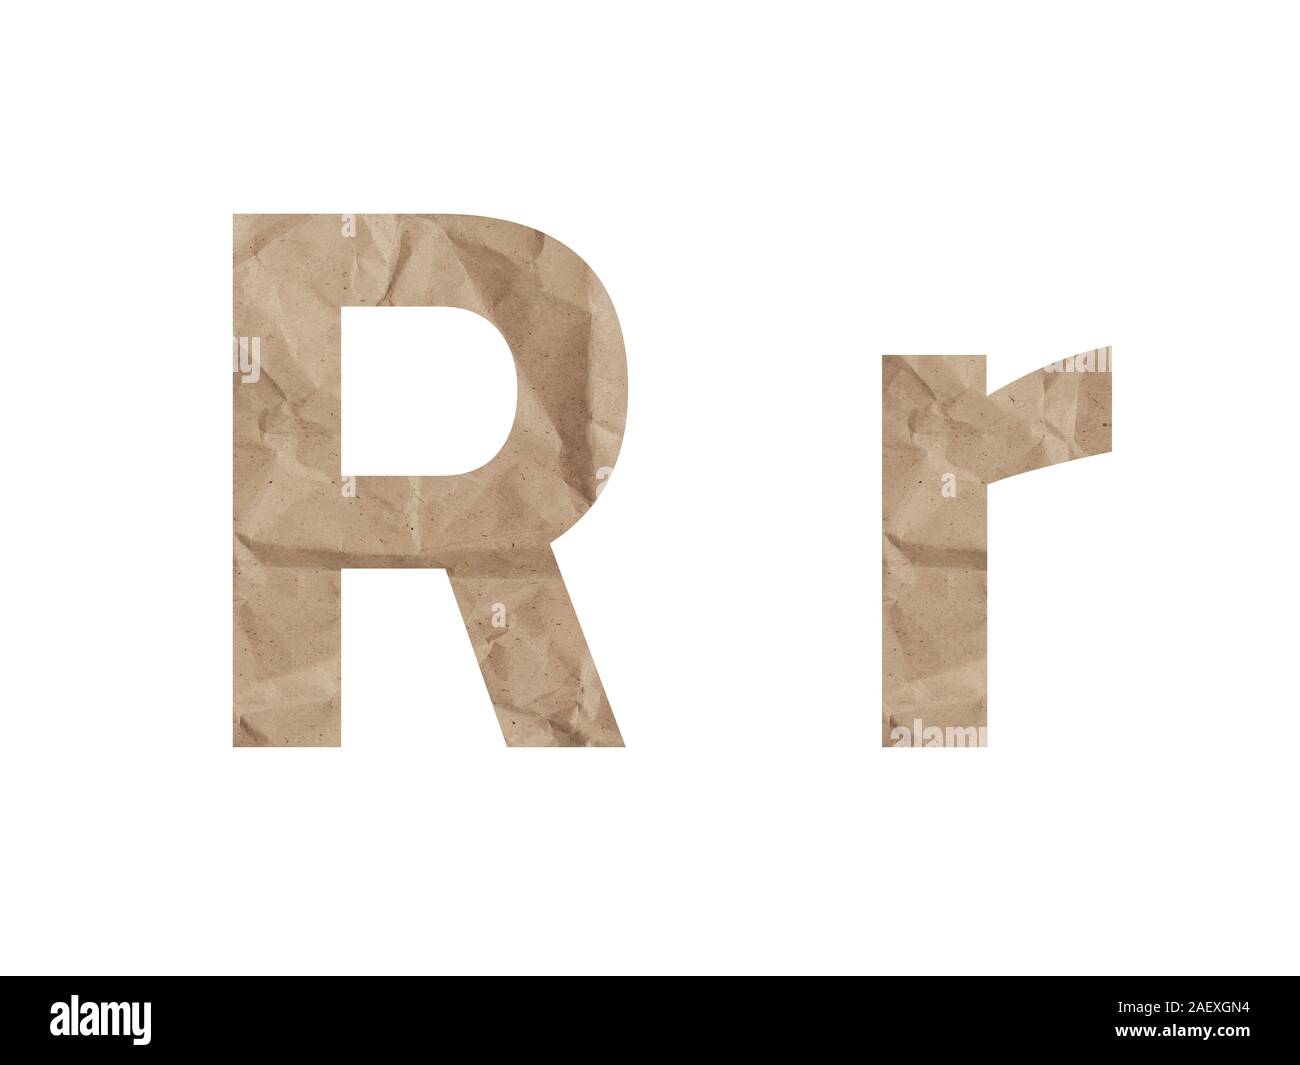 Letter R font alphabet Lettring isolated on white. Crumpled wrapping paper textured effect, crease crack bruising. Isolate paper uppercase lowercase Stock Photo